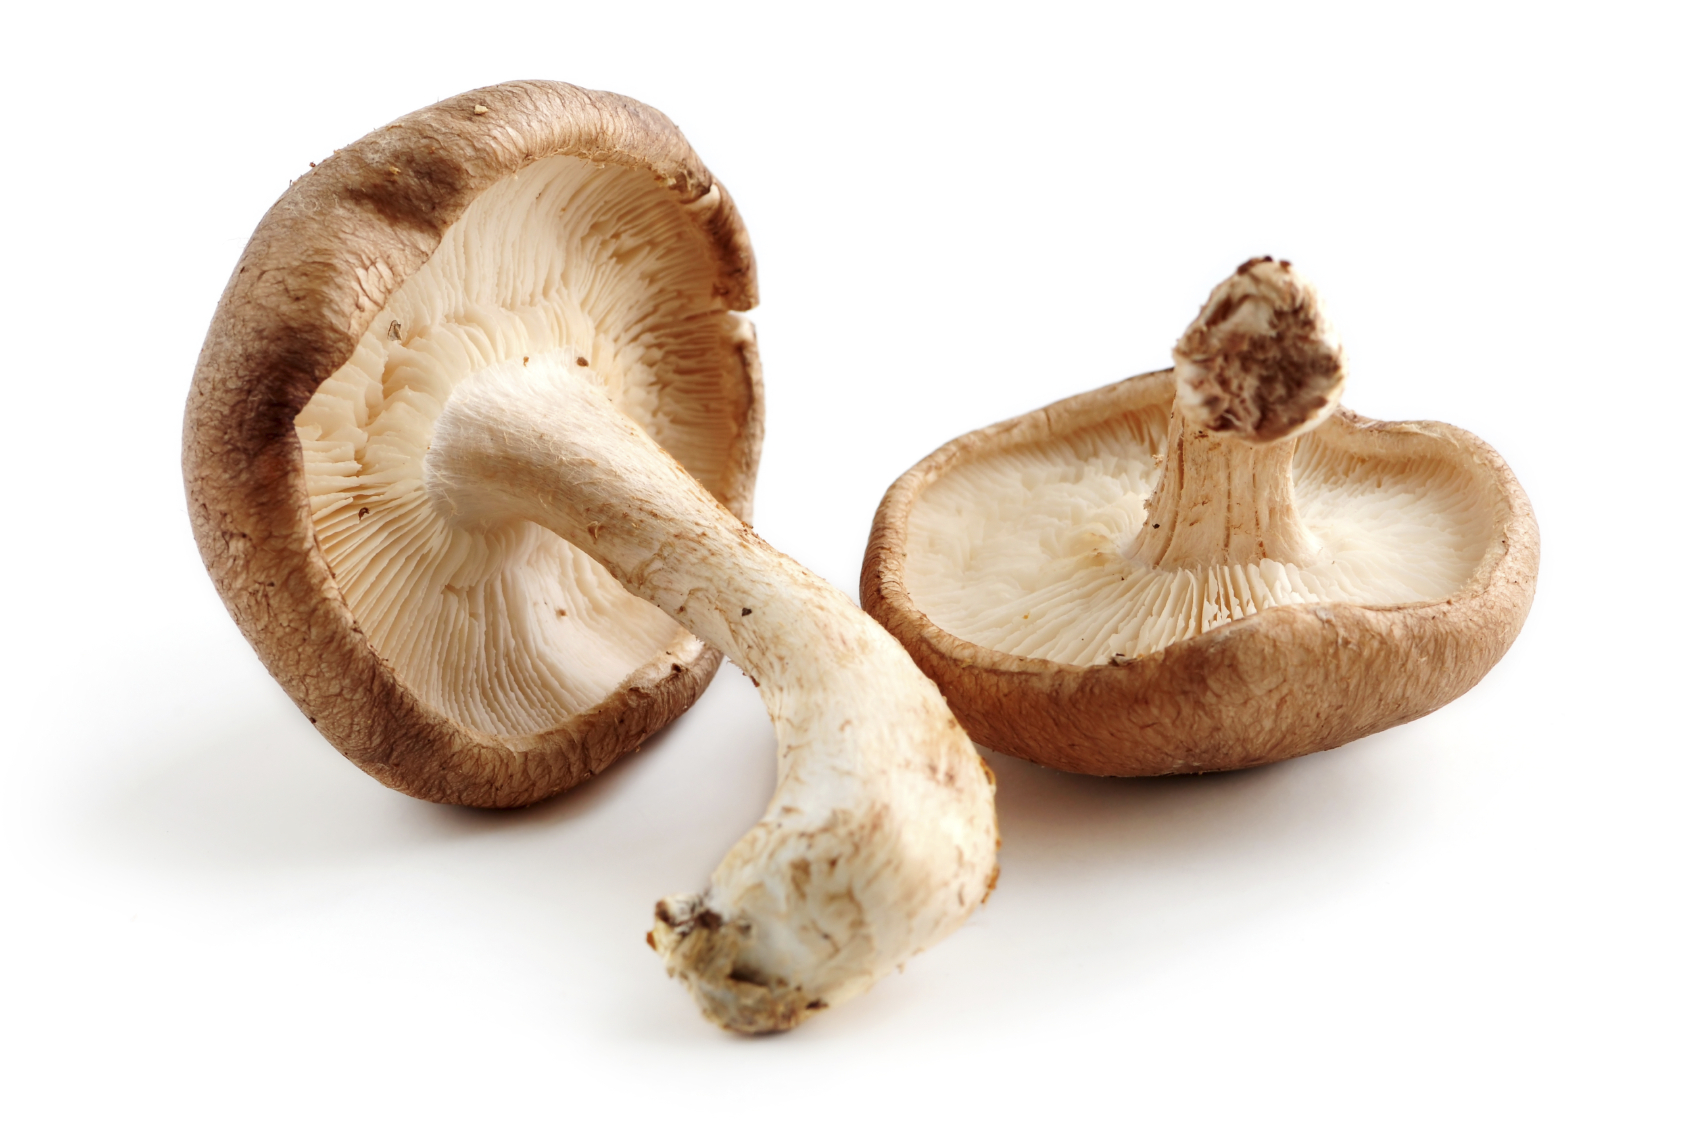 Shiitake-mushrooms-contain-a-powerful-compound-that-may-help-erase-a-cancer-causing-virus.1-ad2997.jpg